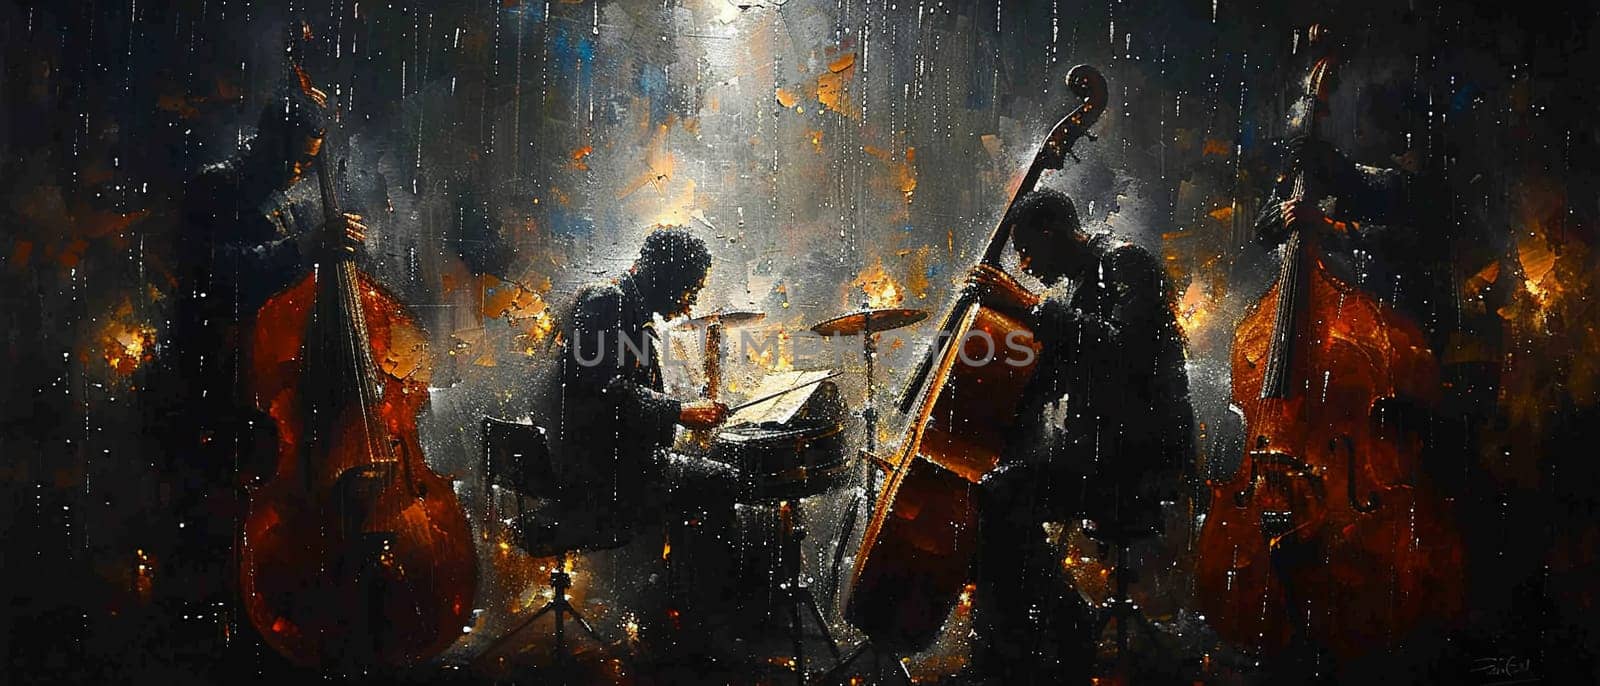 Underground jazz club scene, painted with the smoky ambiance and the soul of music.